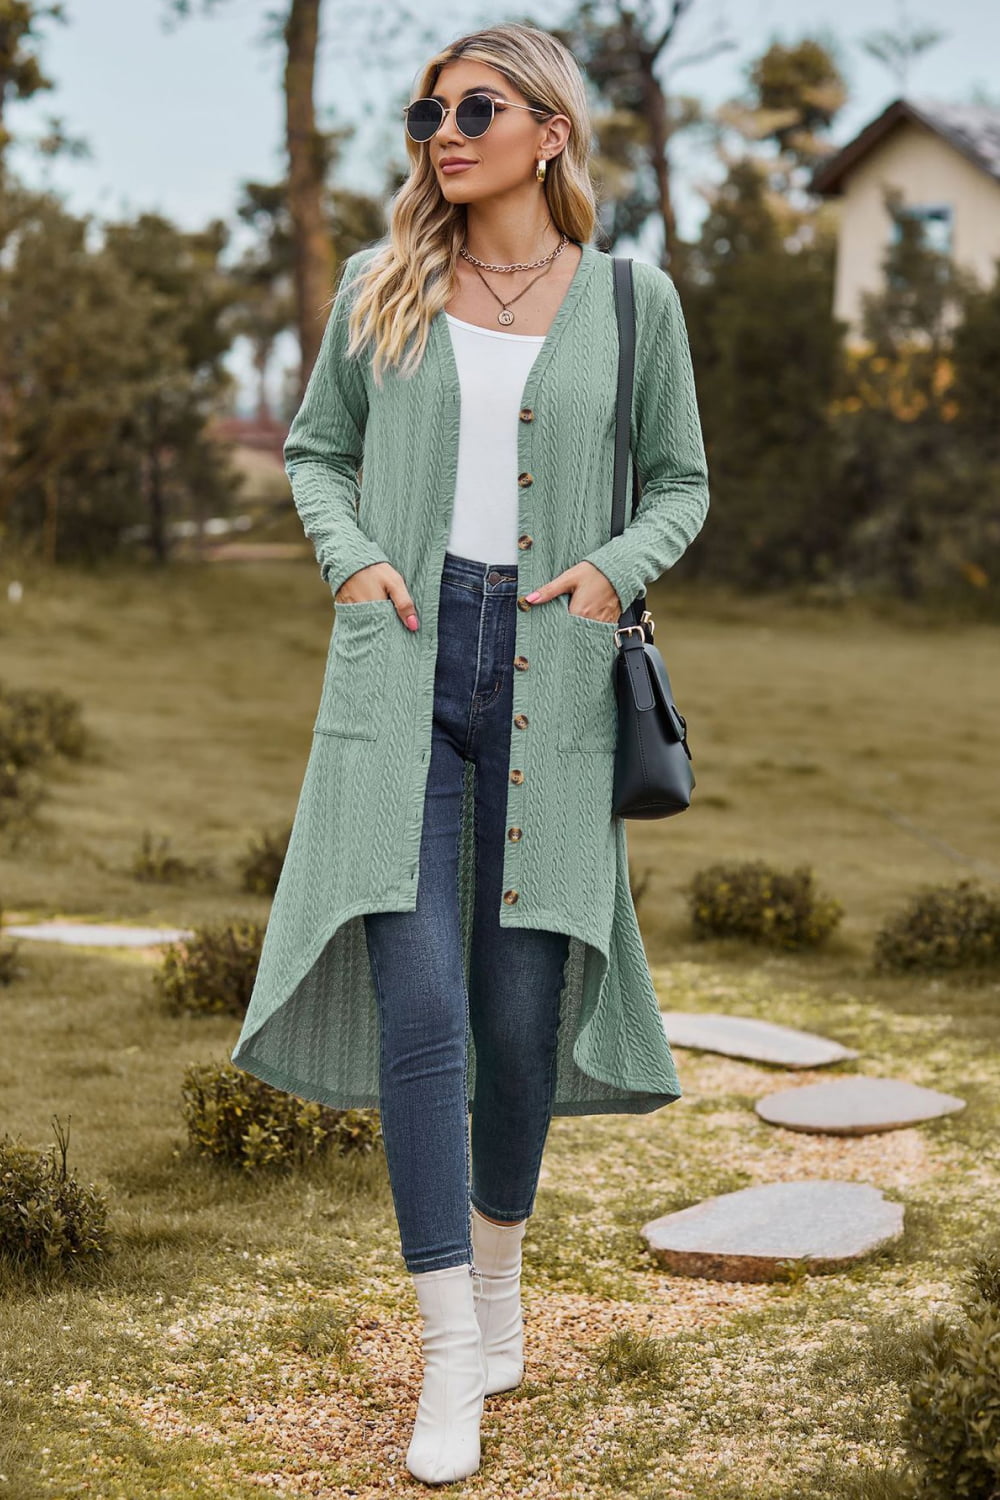 V-Neck Long Sleeve Cardigan with Pocket - Women’s Clothing & Accessories - Shirts & Tops - 3 - 2024